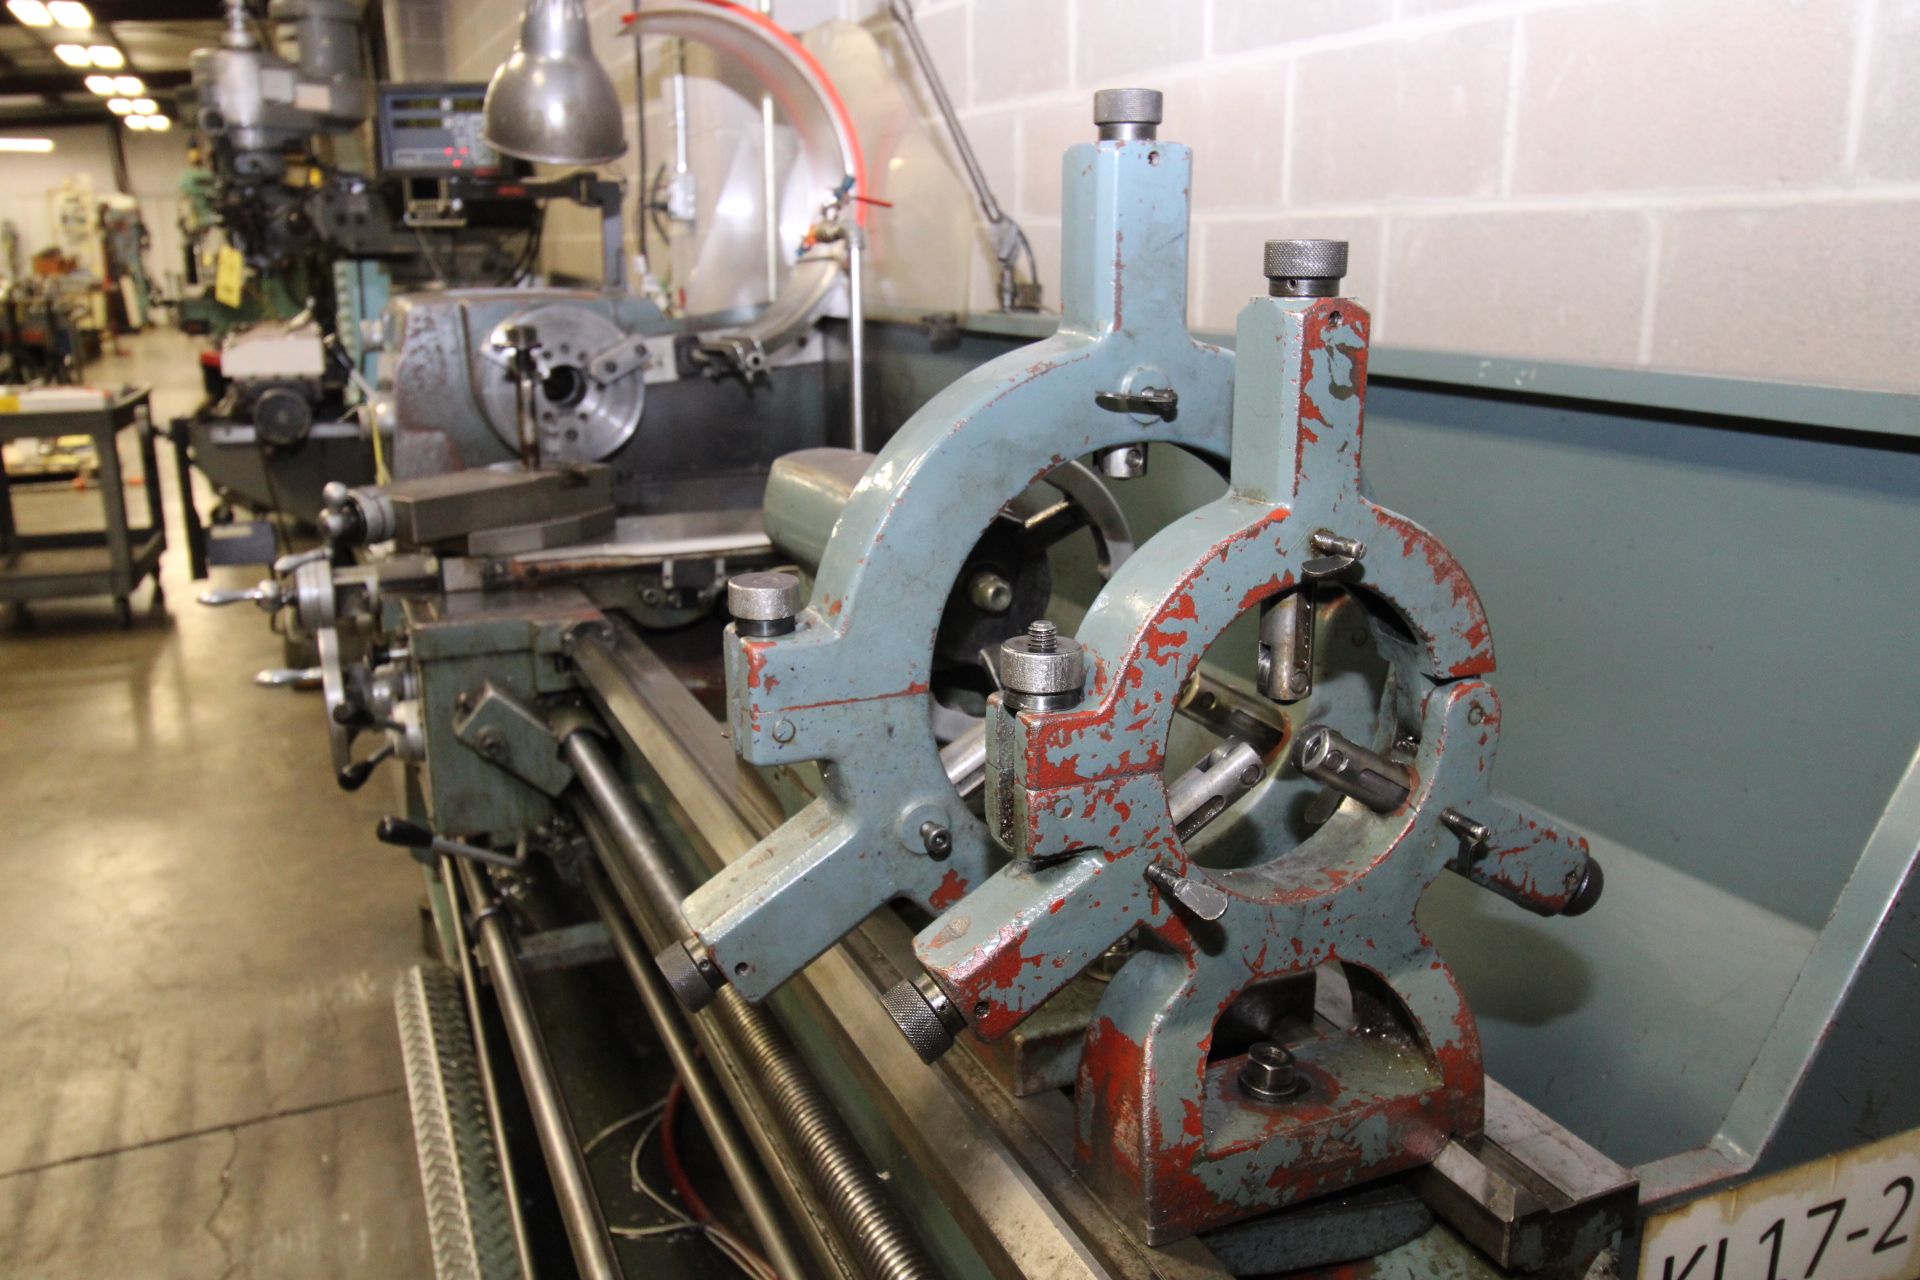 GAP BED ENGINE LATHE, KINGSTON 17” X 60”, new 2003, spds: 52-1350 RPM, 10” dia. 3-jaw chuck, 4-jaw - Image 3 of 15